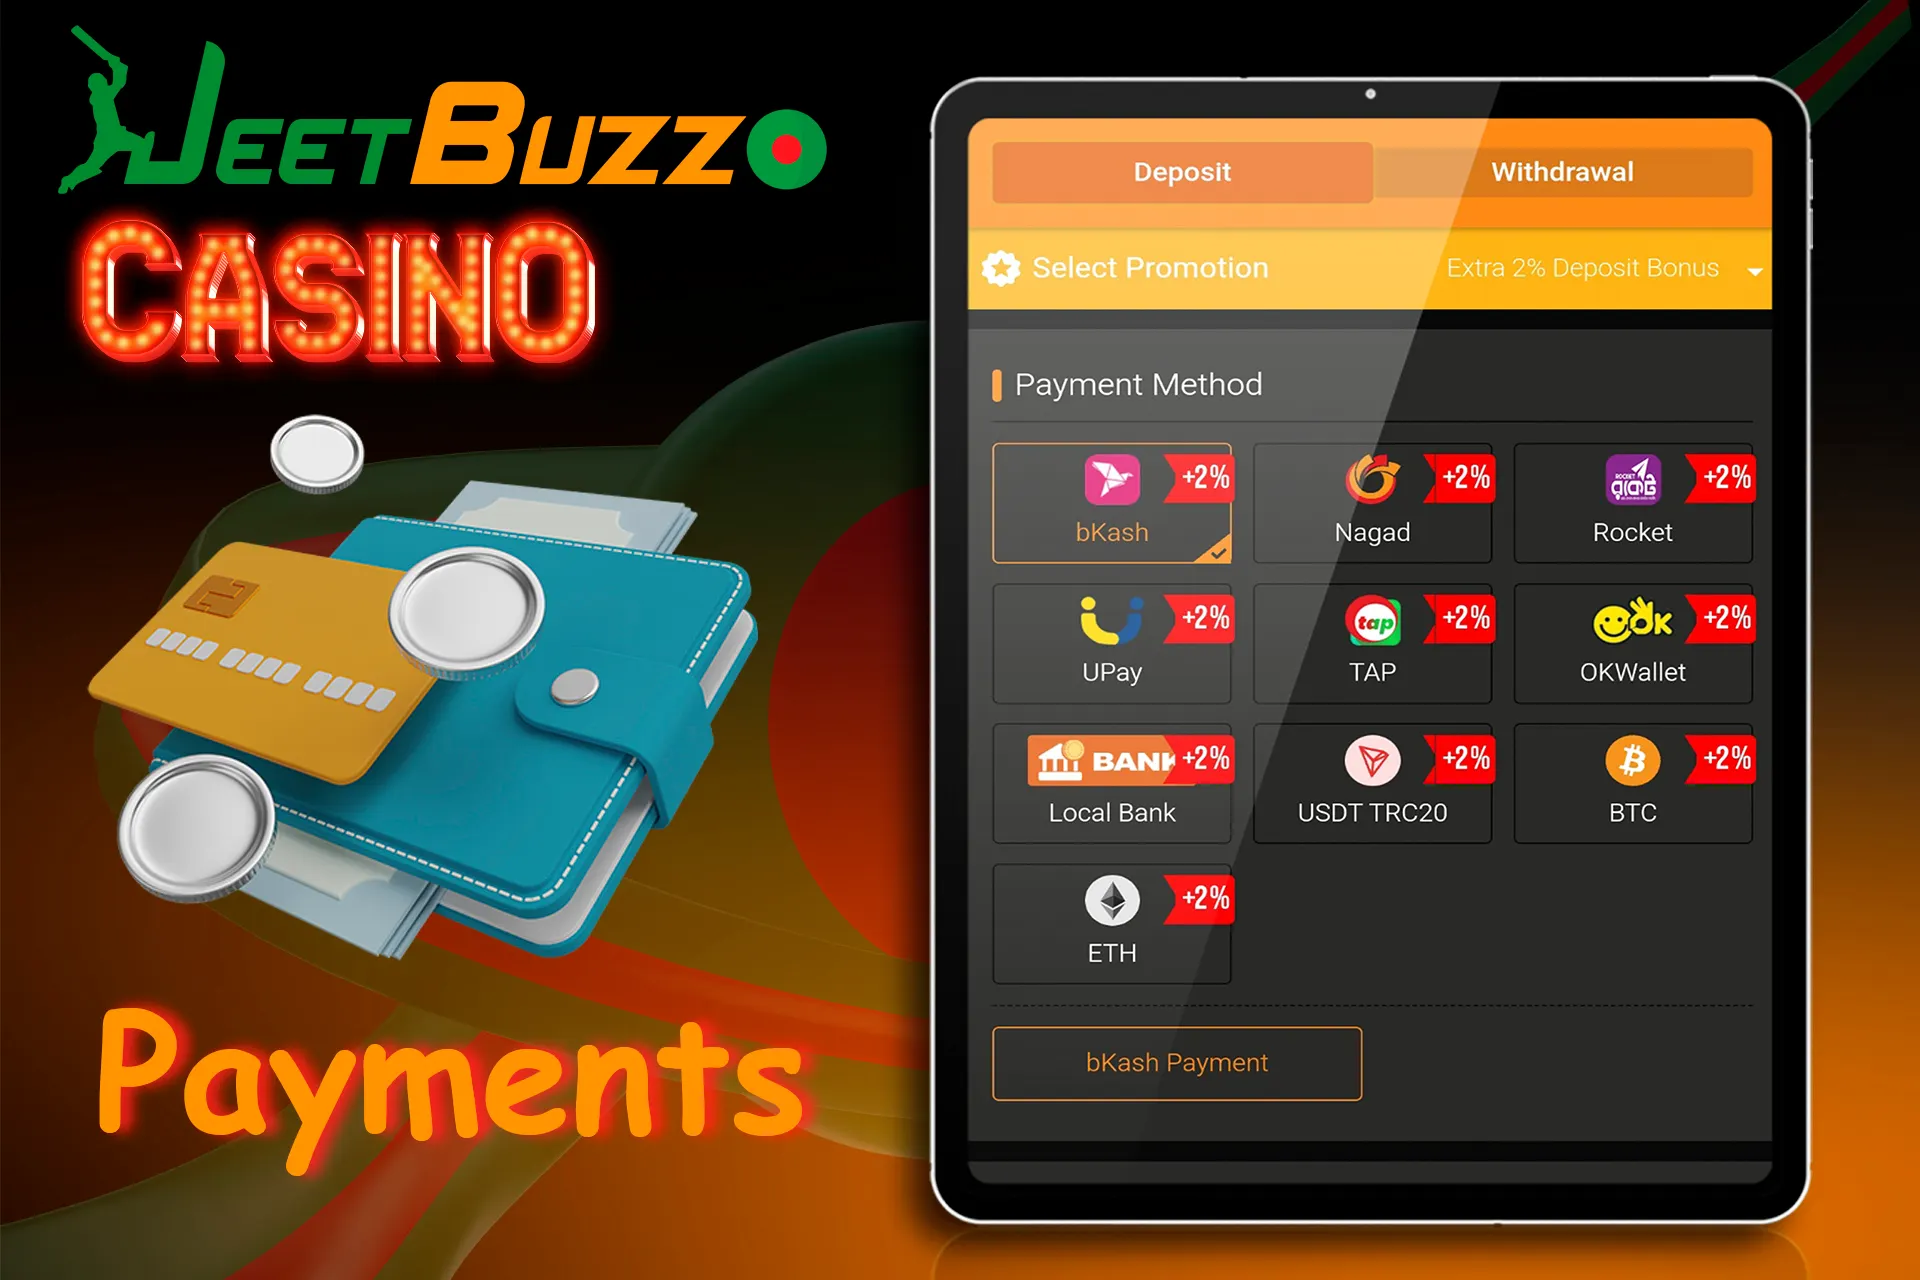 information about available payment options and their transaction limits at JeetBuzz Casino Bangladesh